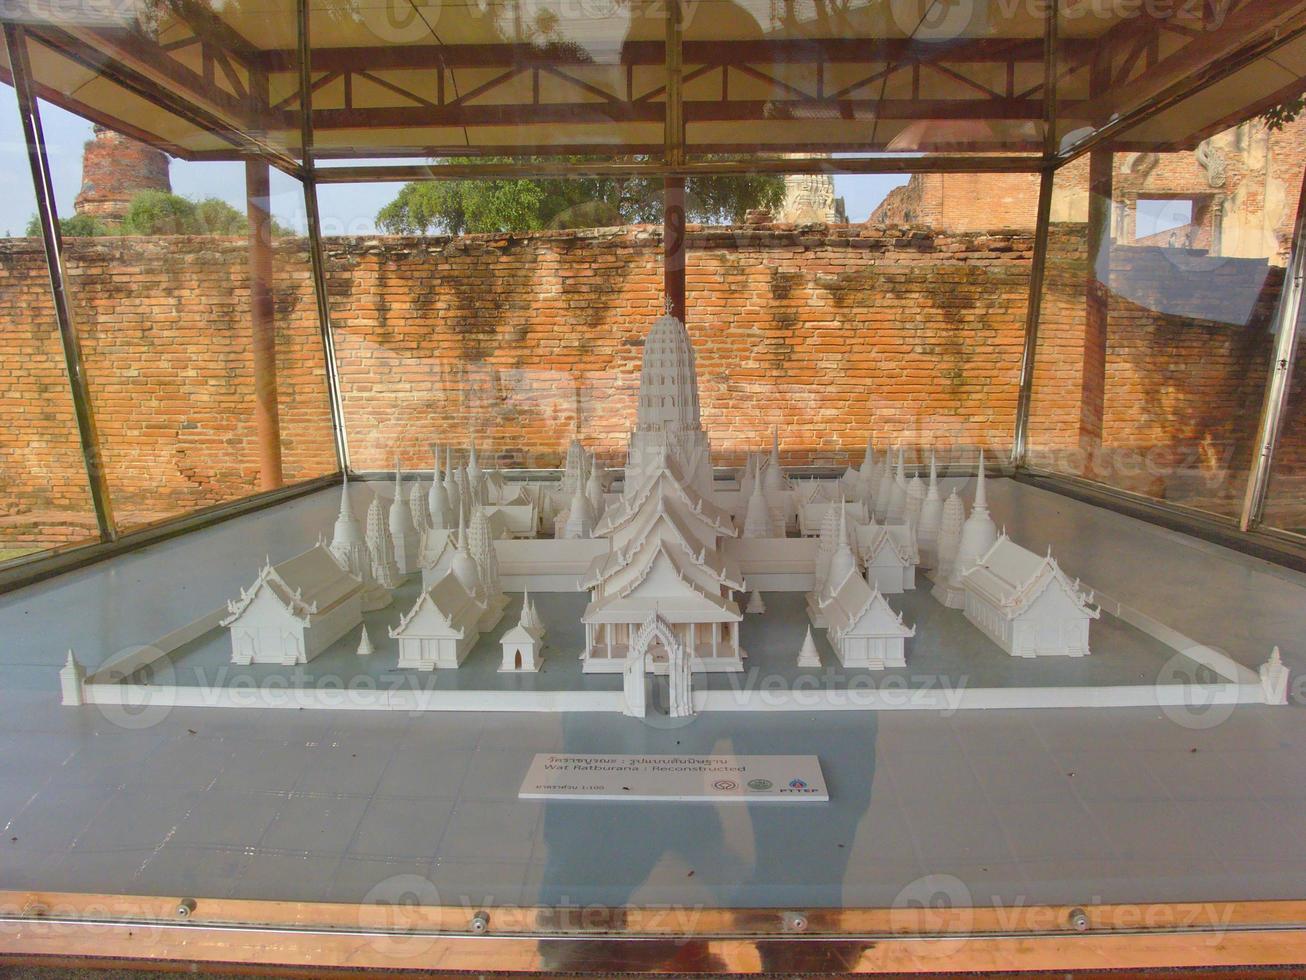 Wihan Phra Mongkhon Bophit in Ayutthaya That has been well restored Inside there is a statue of a large president Buddha. Name Phra Mongkhon Bophit. photo